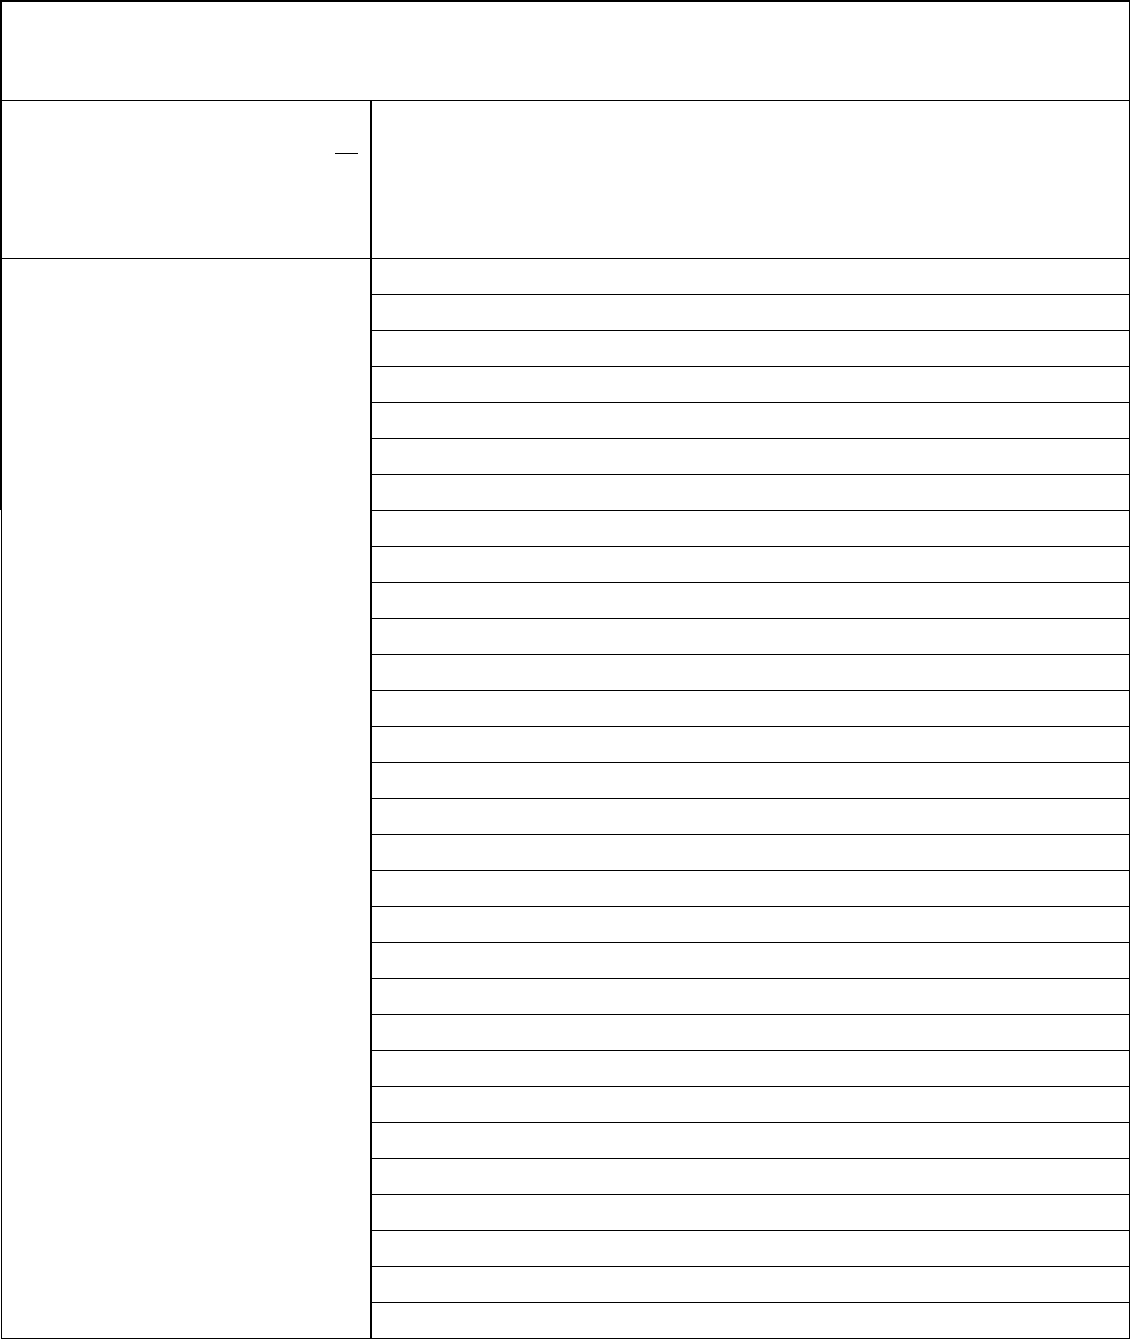 Cornell Notes Template In Word And Pdf Formats Regarding Cornell Note Template Word